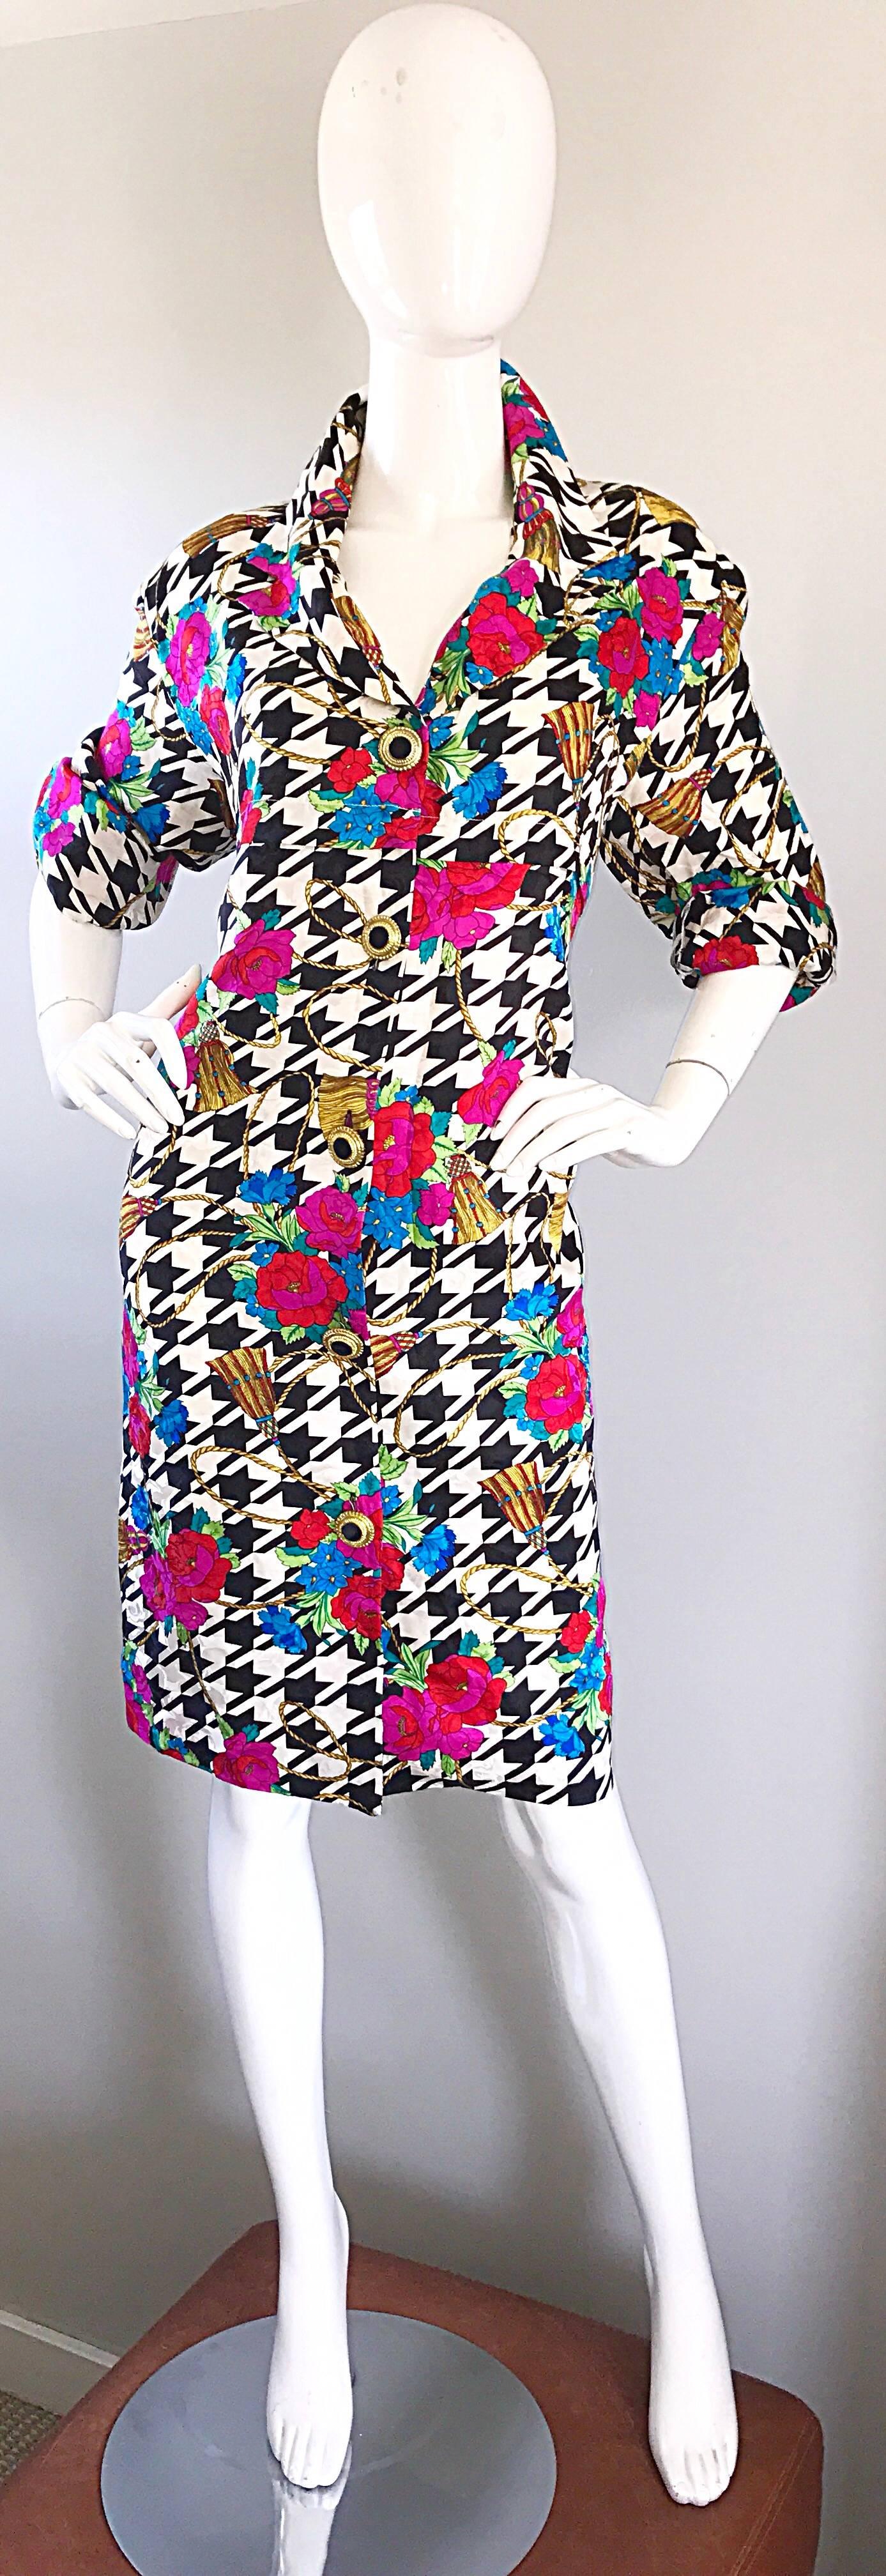 Incredible vintage 90s houndstooth silk shirt dress! Features vibrant pink, red, blue and green floral print, with golden printed ropes throughout the houndstooth. Black and gold decorated up the front, with matching buttons at sleeve cuffs. Very